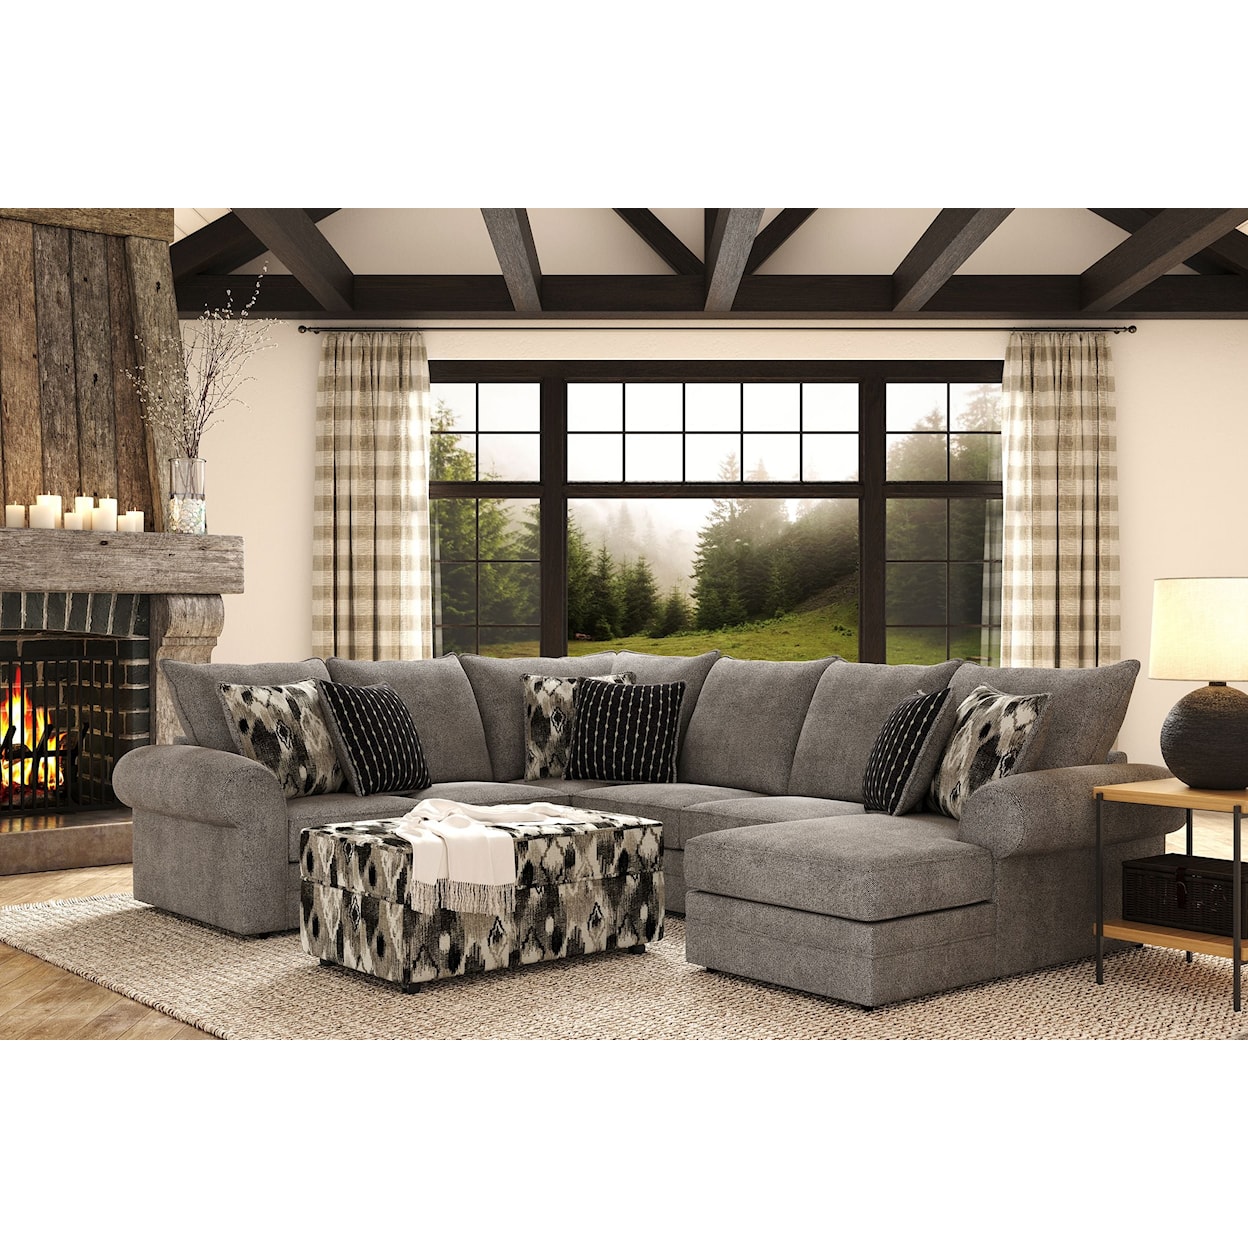 Hughes Furniture 9950 3-Piece Sectional